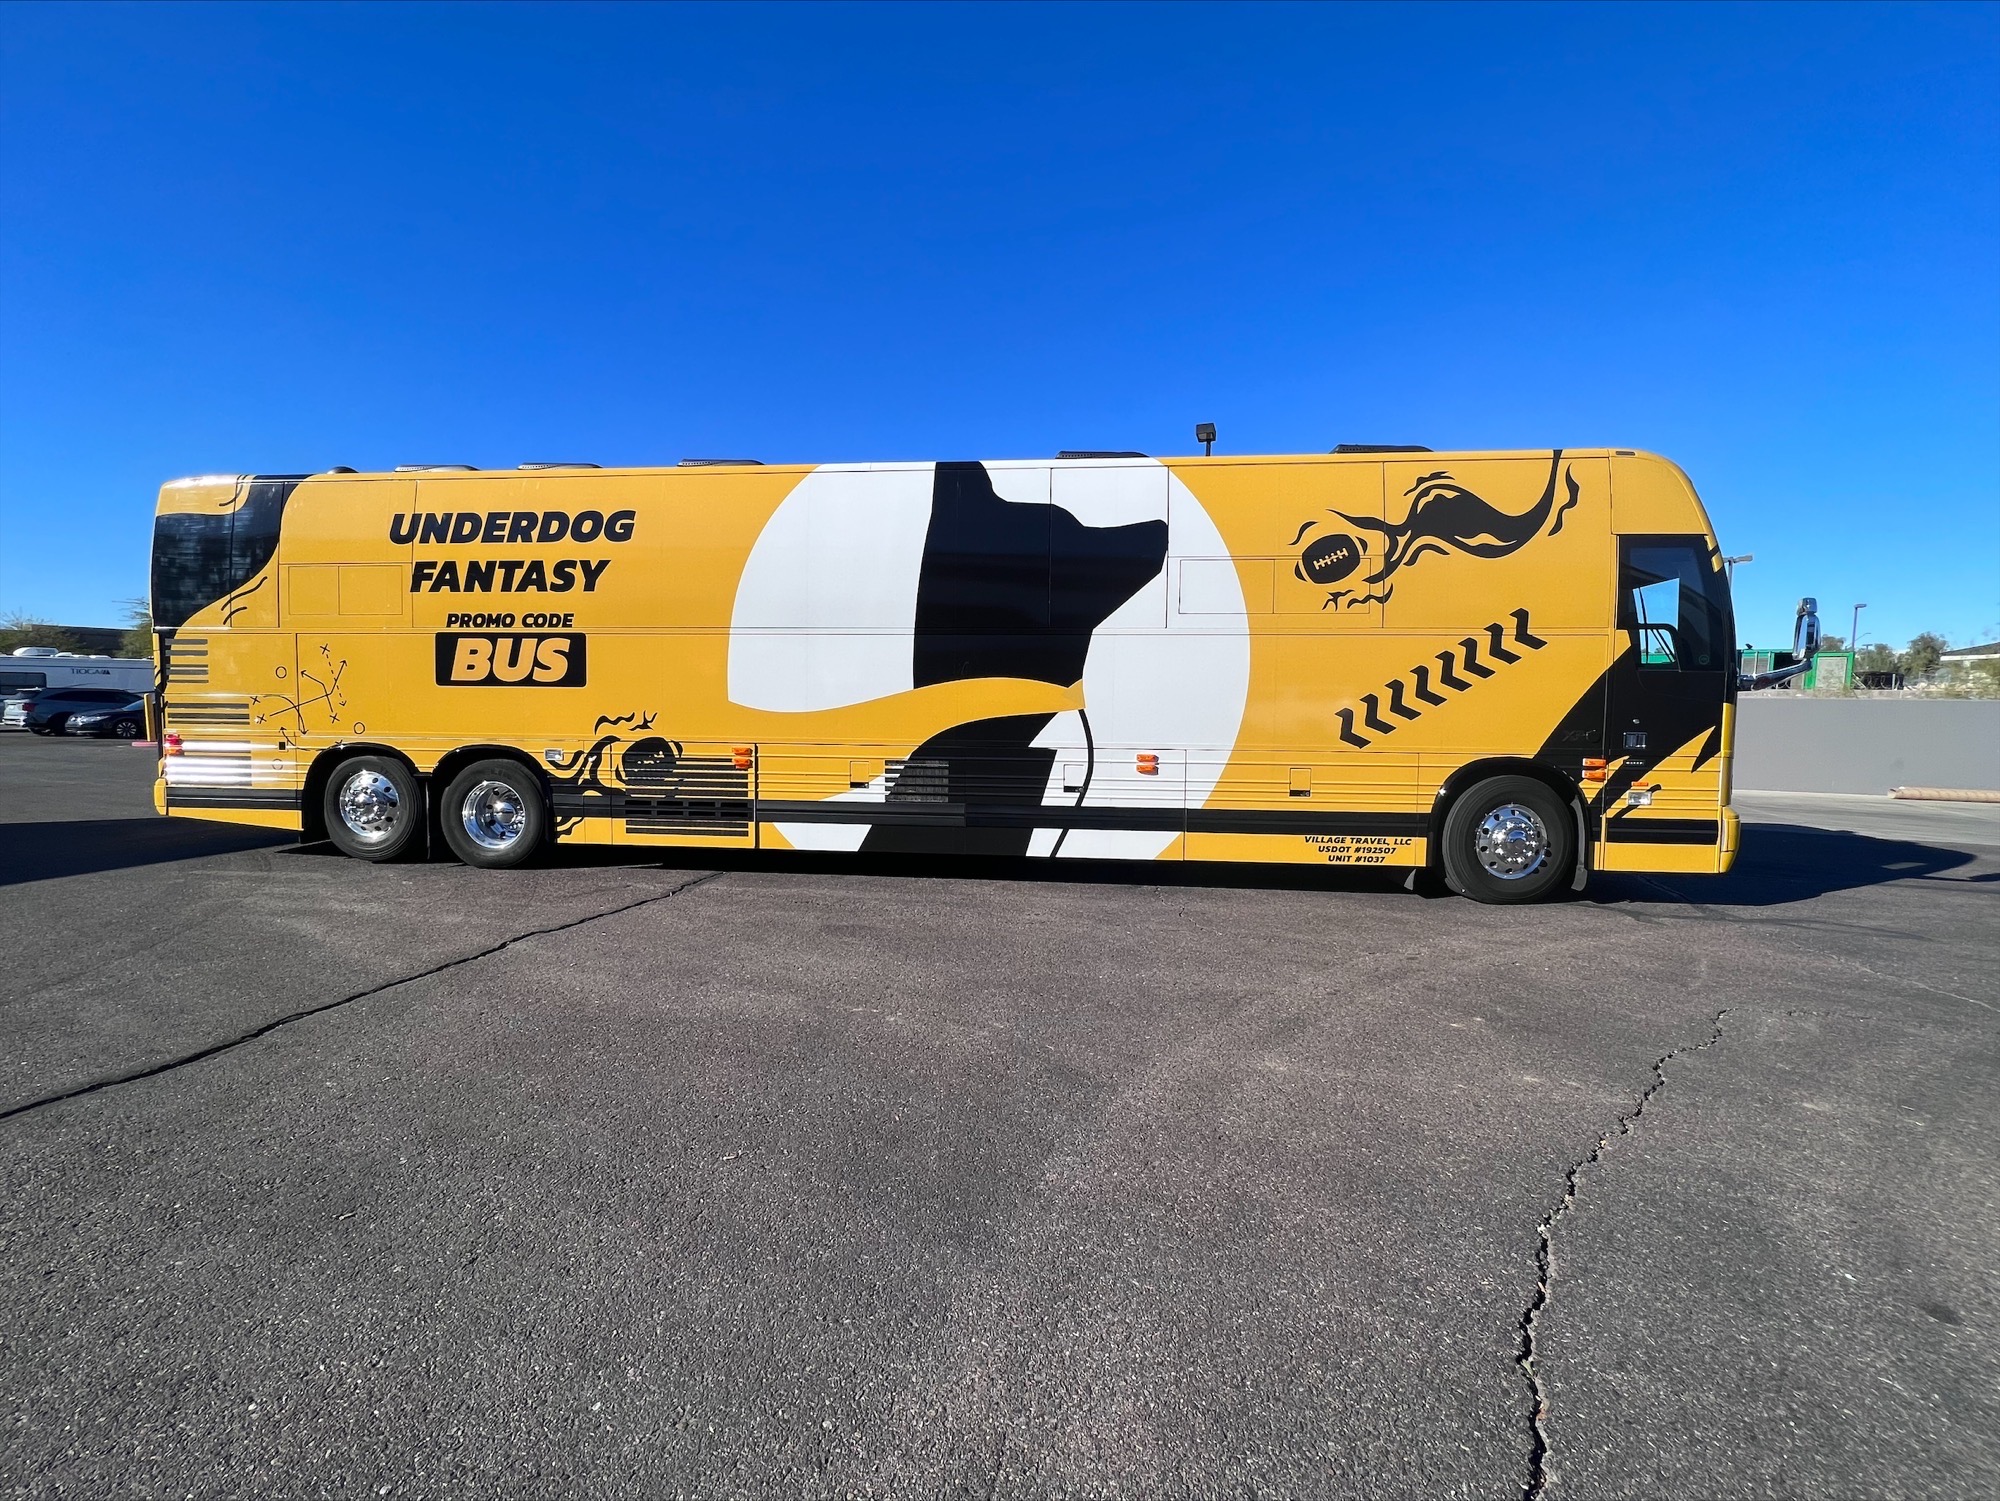 Nationwide Bus Charter's bus wrap job for the Underdog Fantasy in preparation for the 2023 Superbowl.